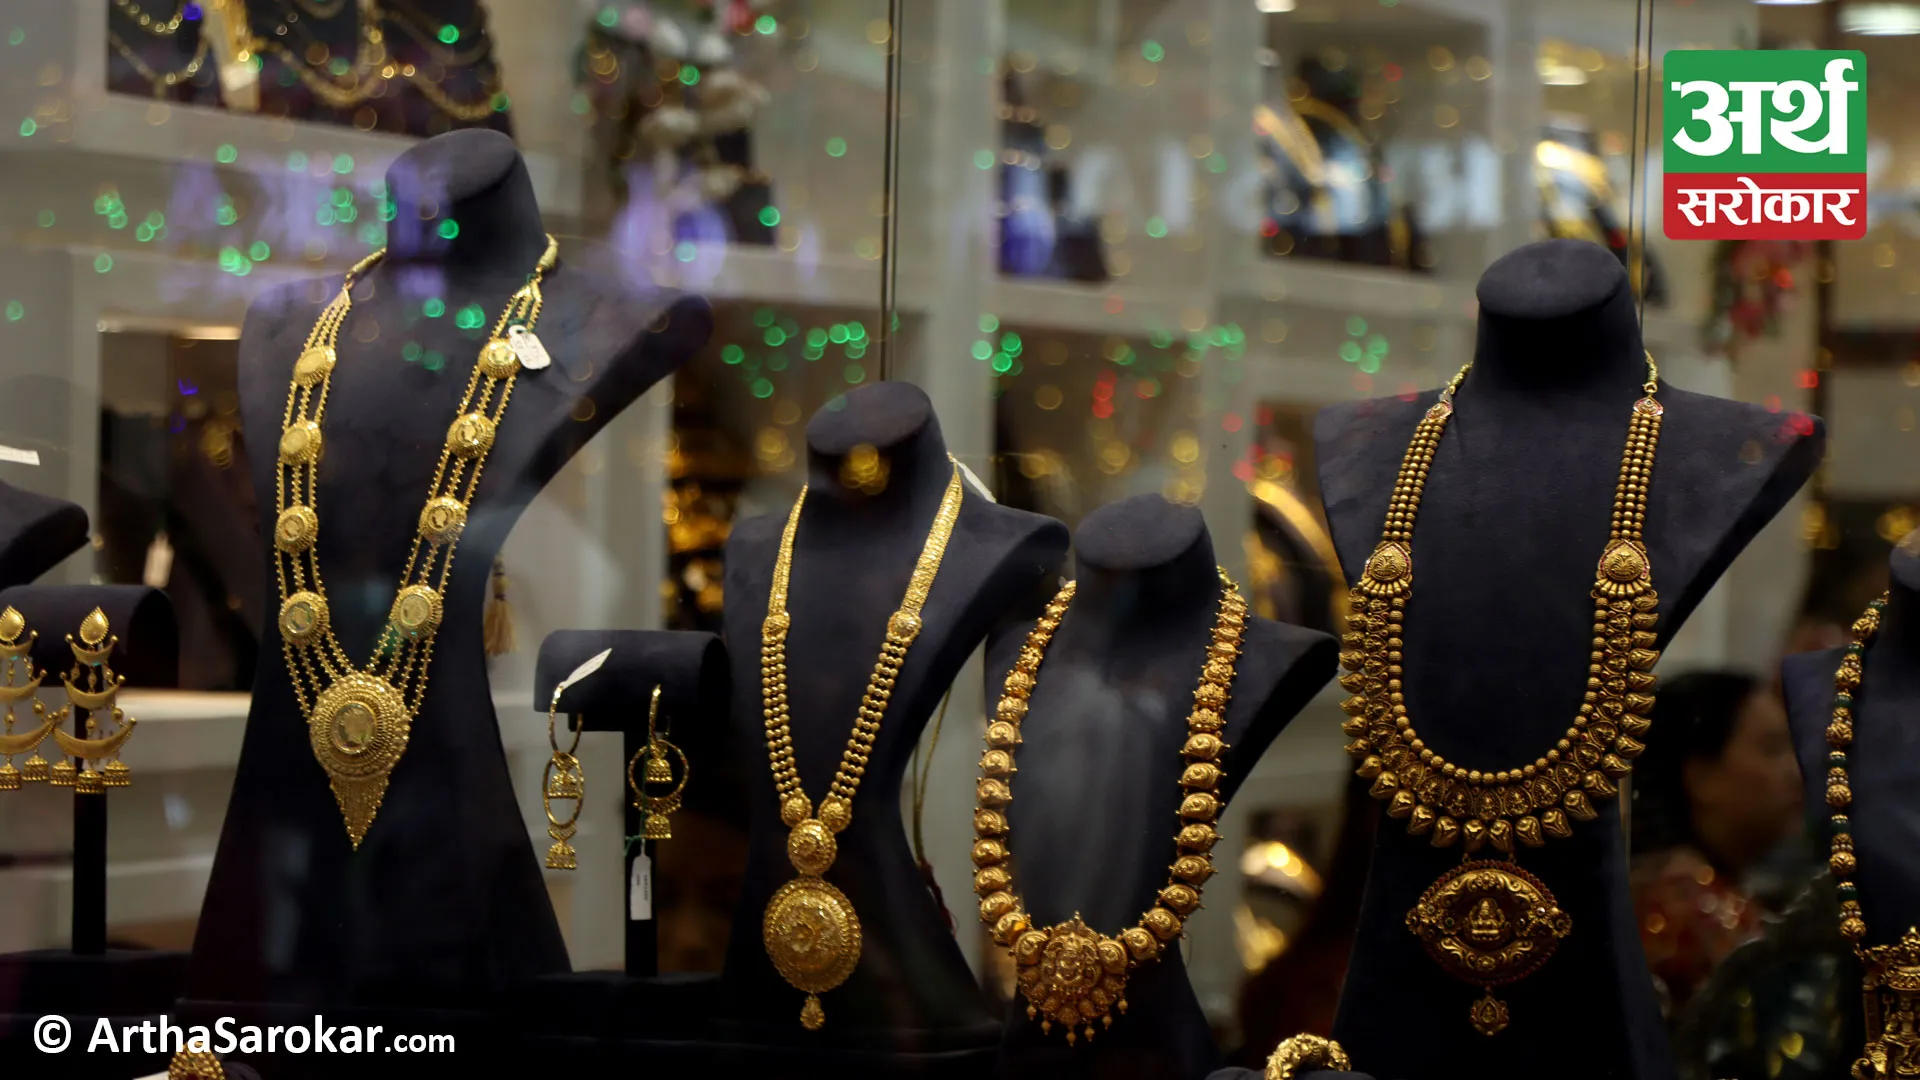 Price of gold increased by 600 rupees per tola